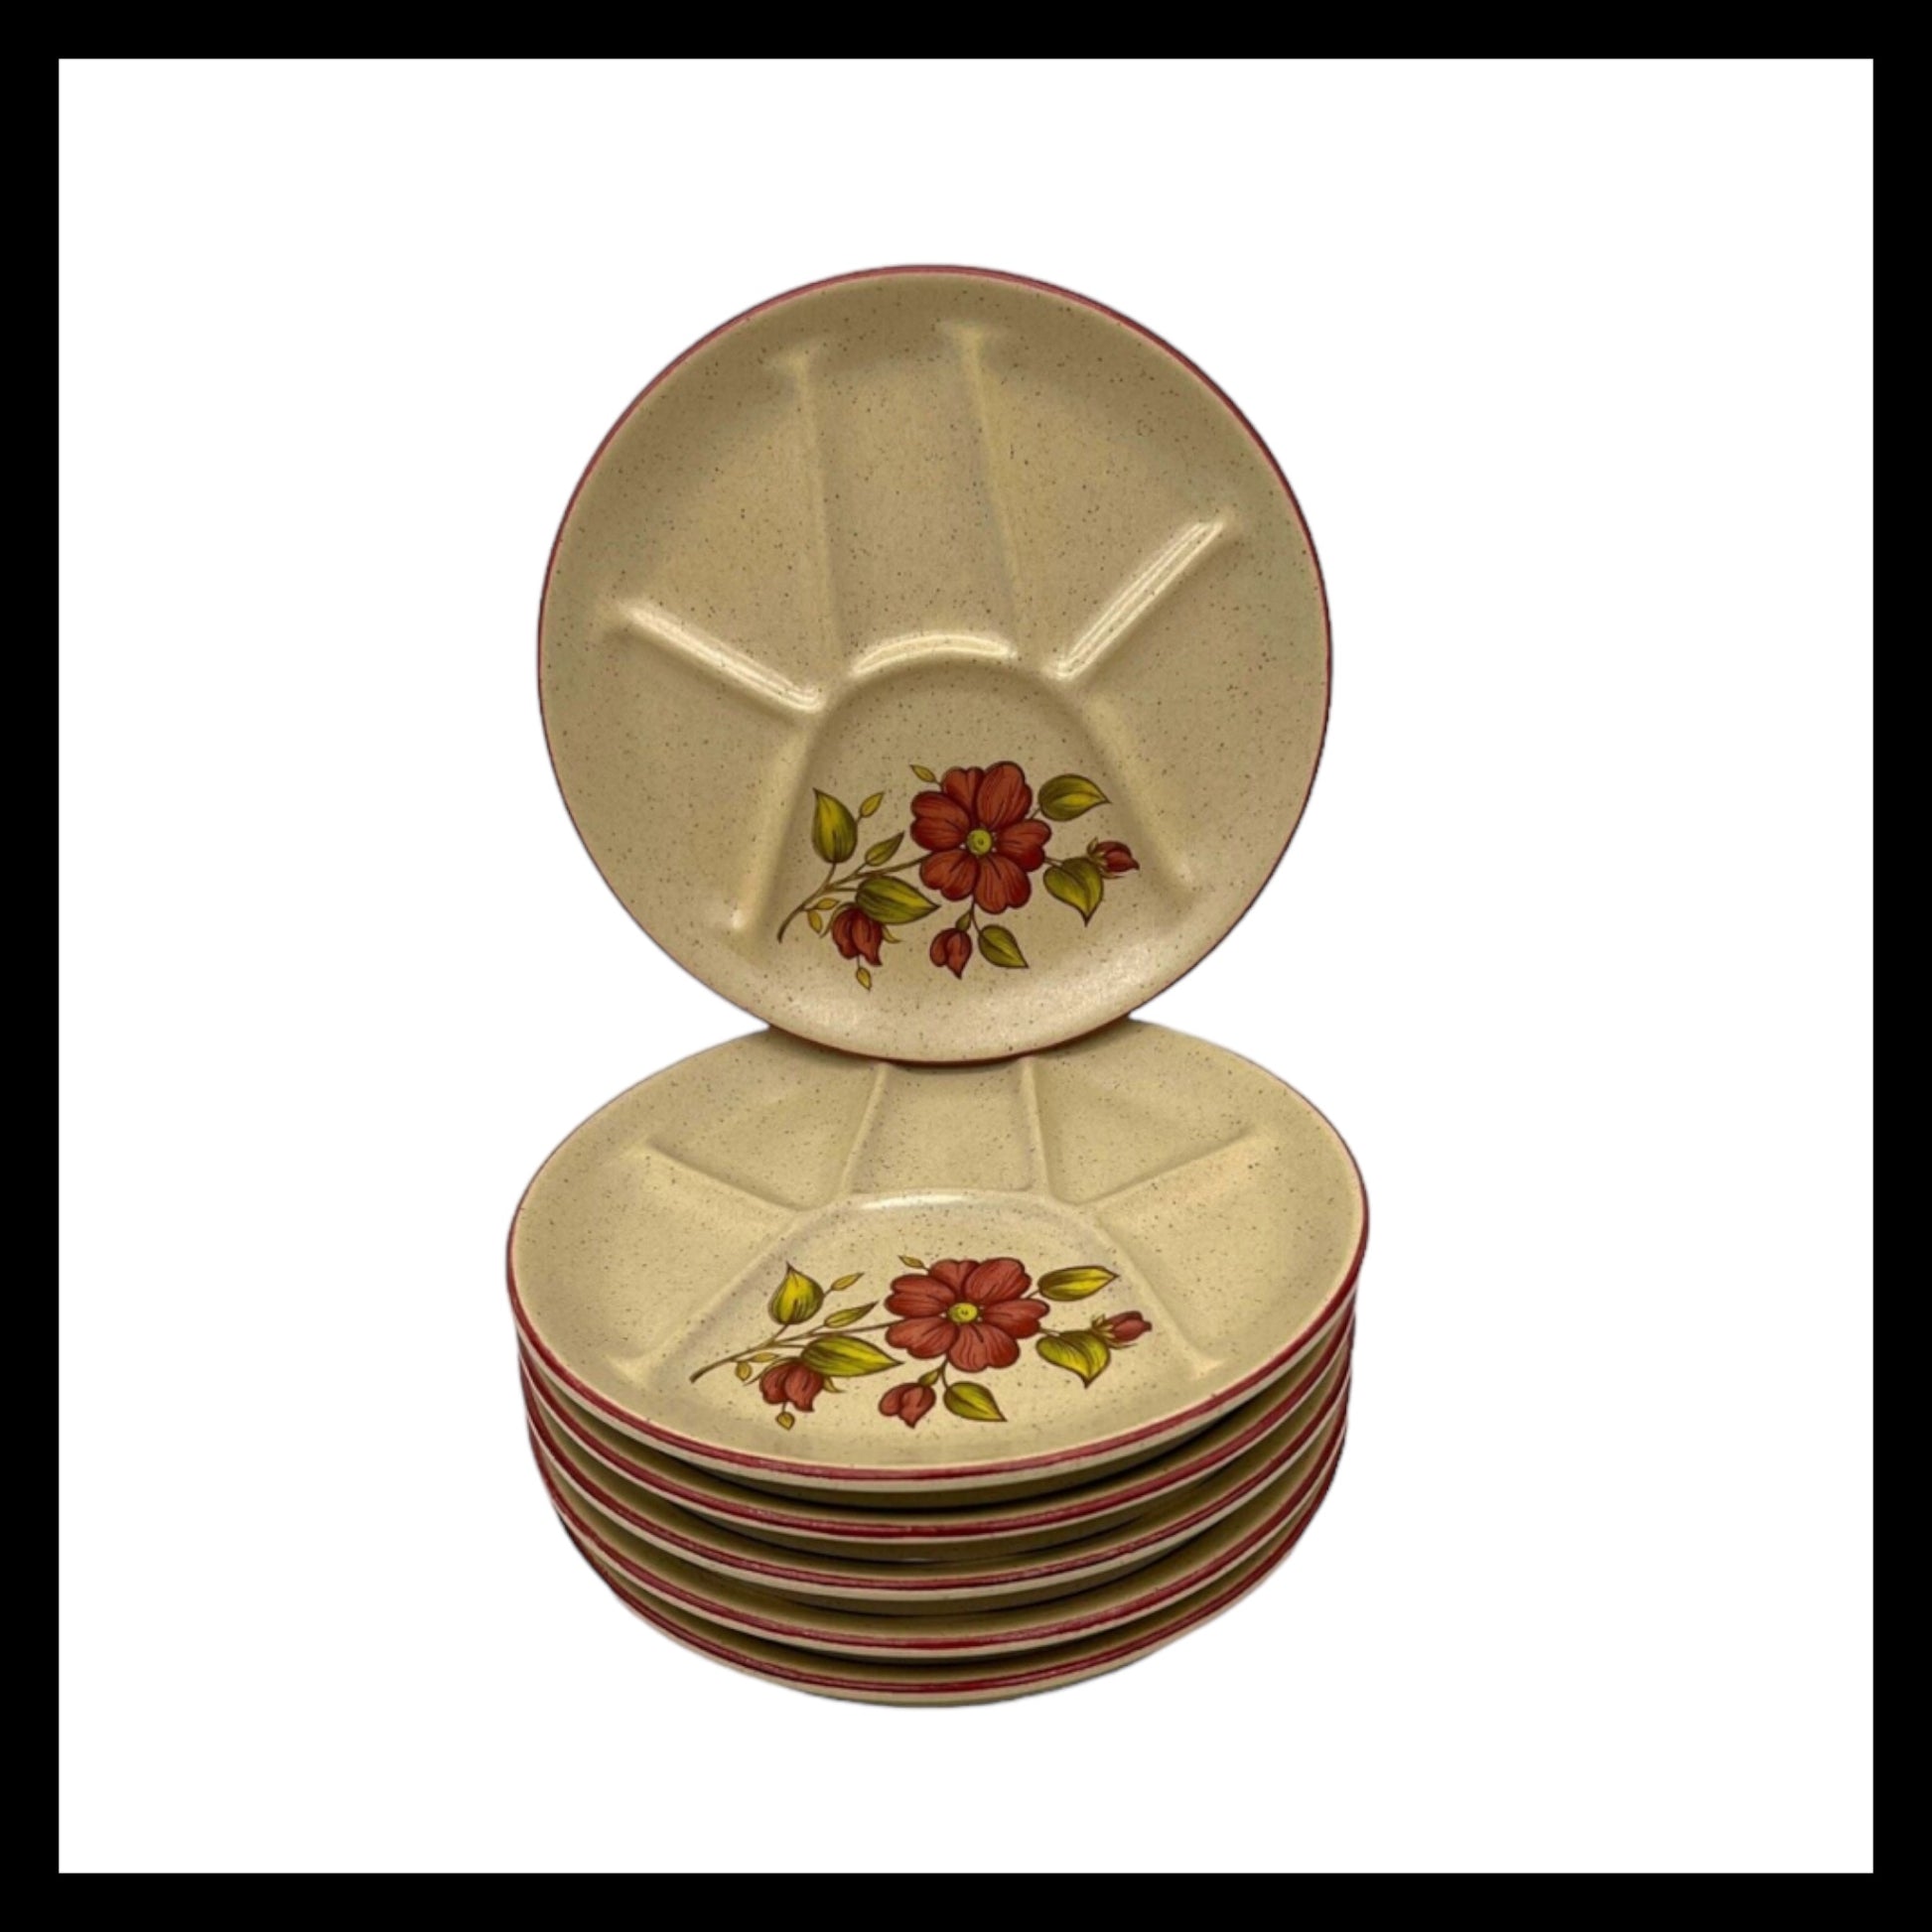 French glazed stoneware fondue sectioned plate set sold by All Things French Store